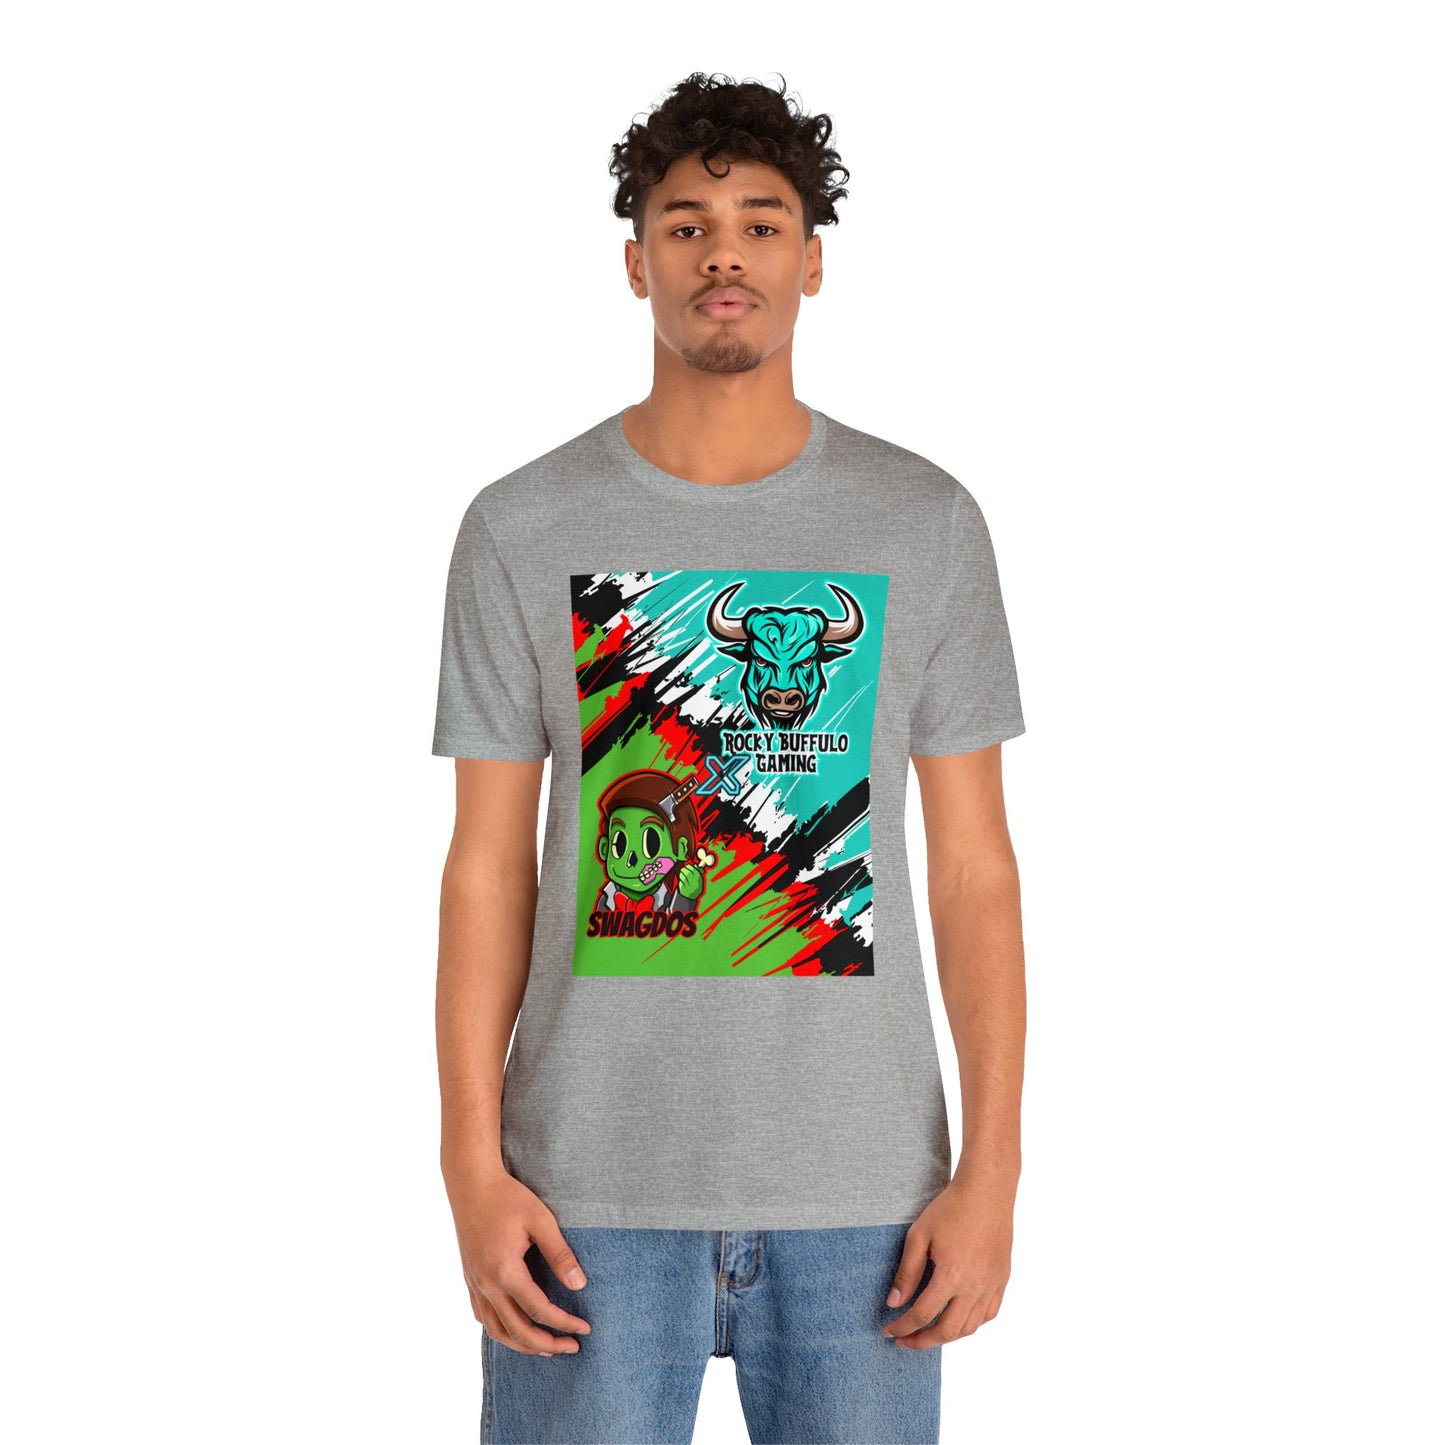 *Limited Edition* Rocky Buffulo x  Swagdos Collab Unisex T-shirt